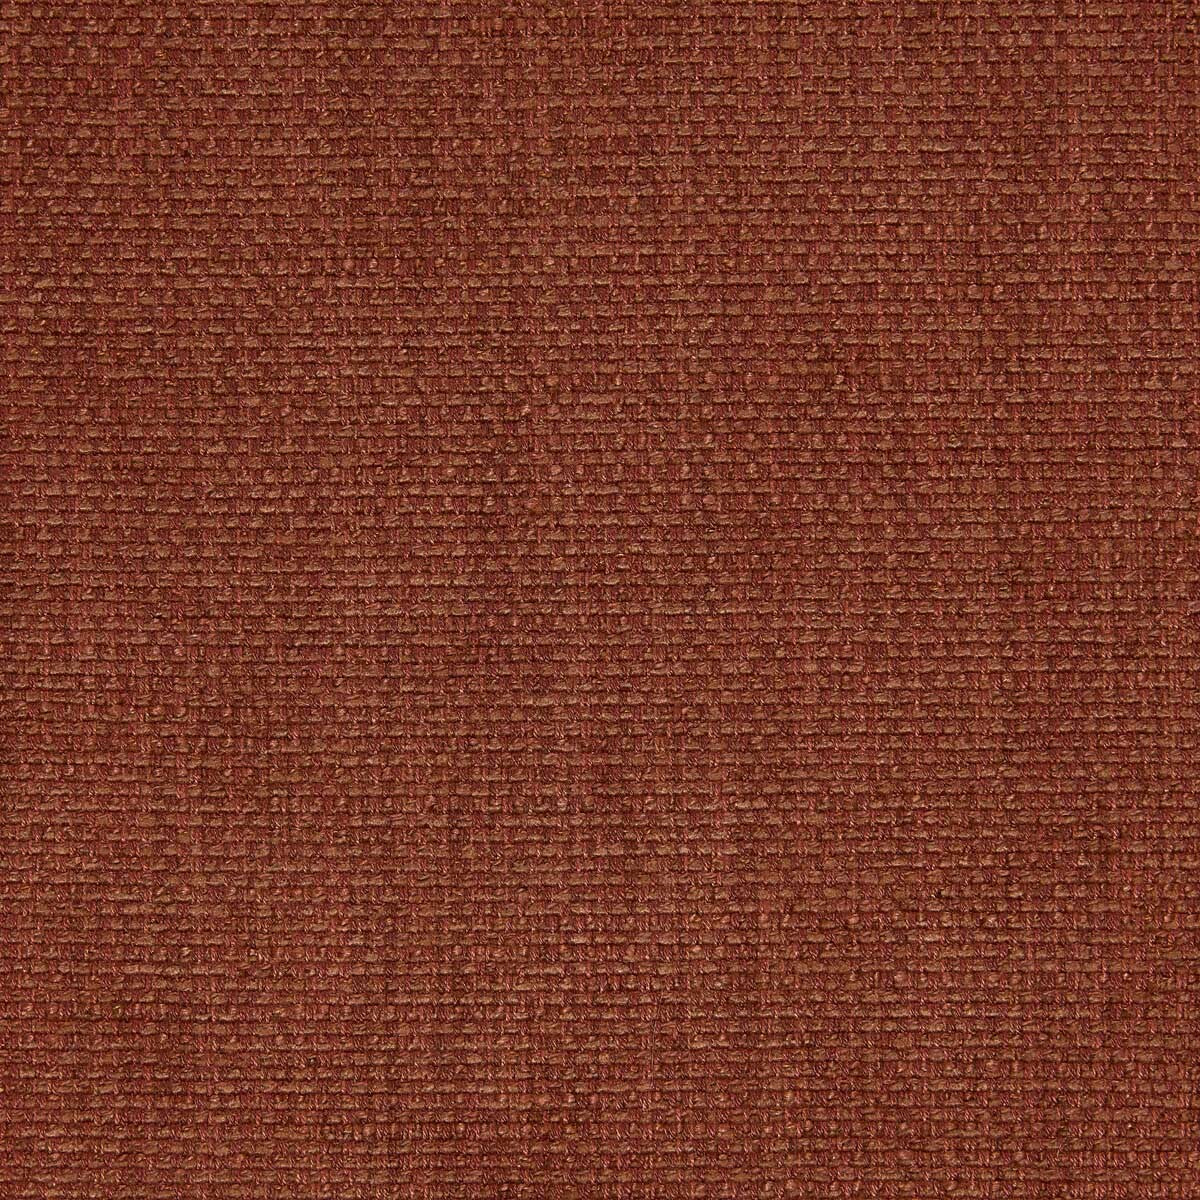 Godai fabric in 8 color - pattern LZ-30349.08.0 - by Kravet Design in the Lizzo collection